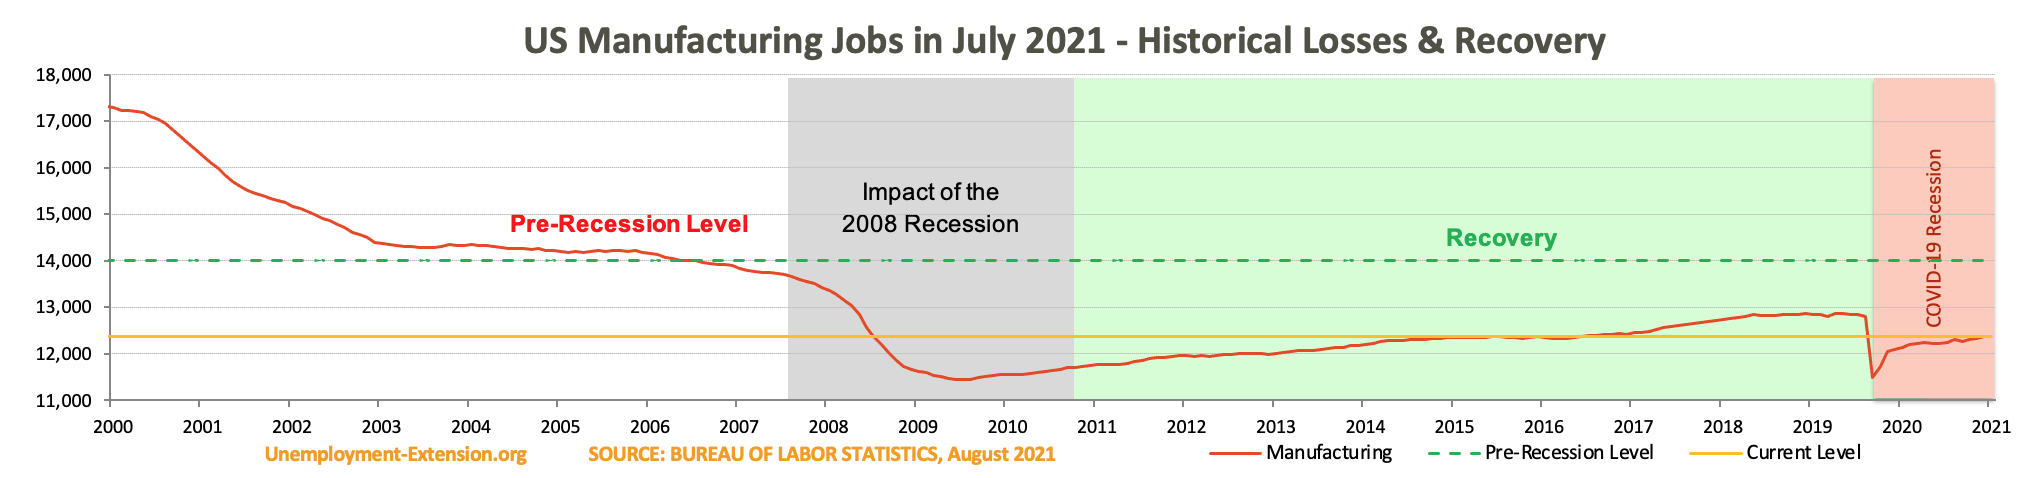 US Manufacturing jobs in July 2021.